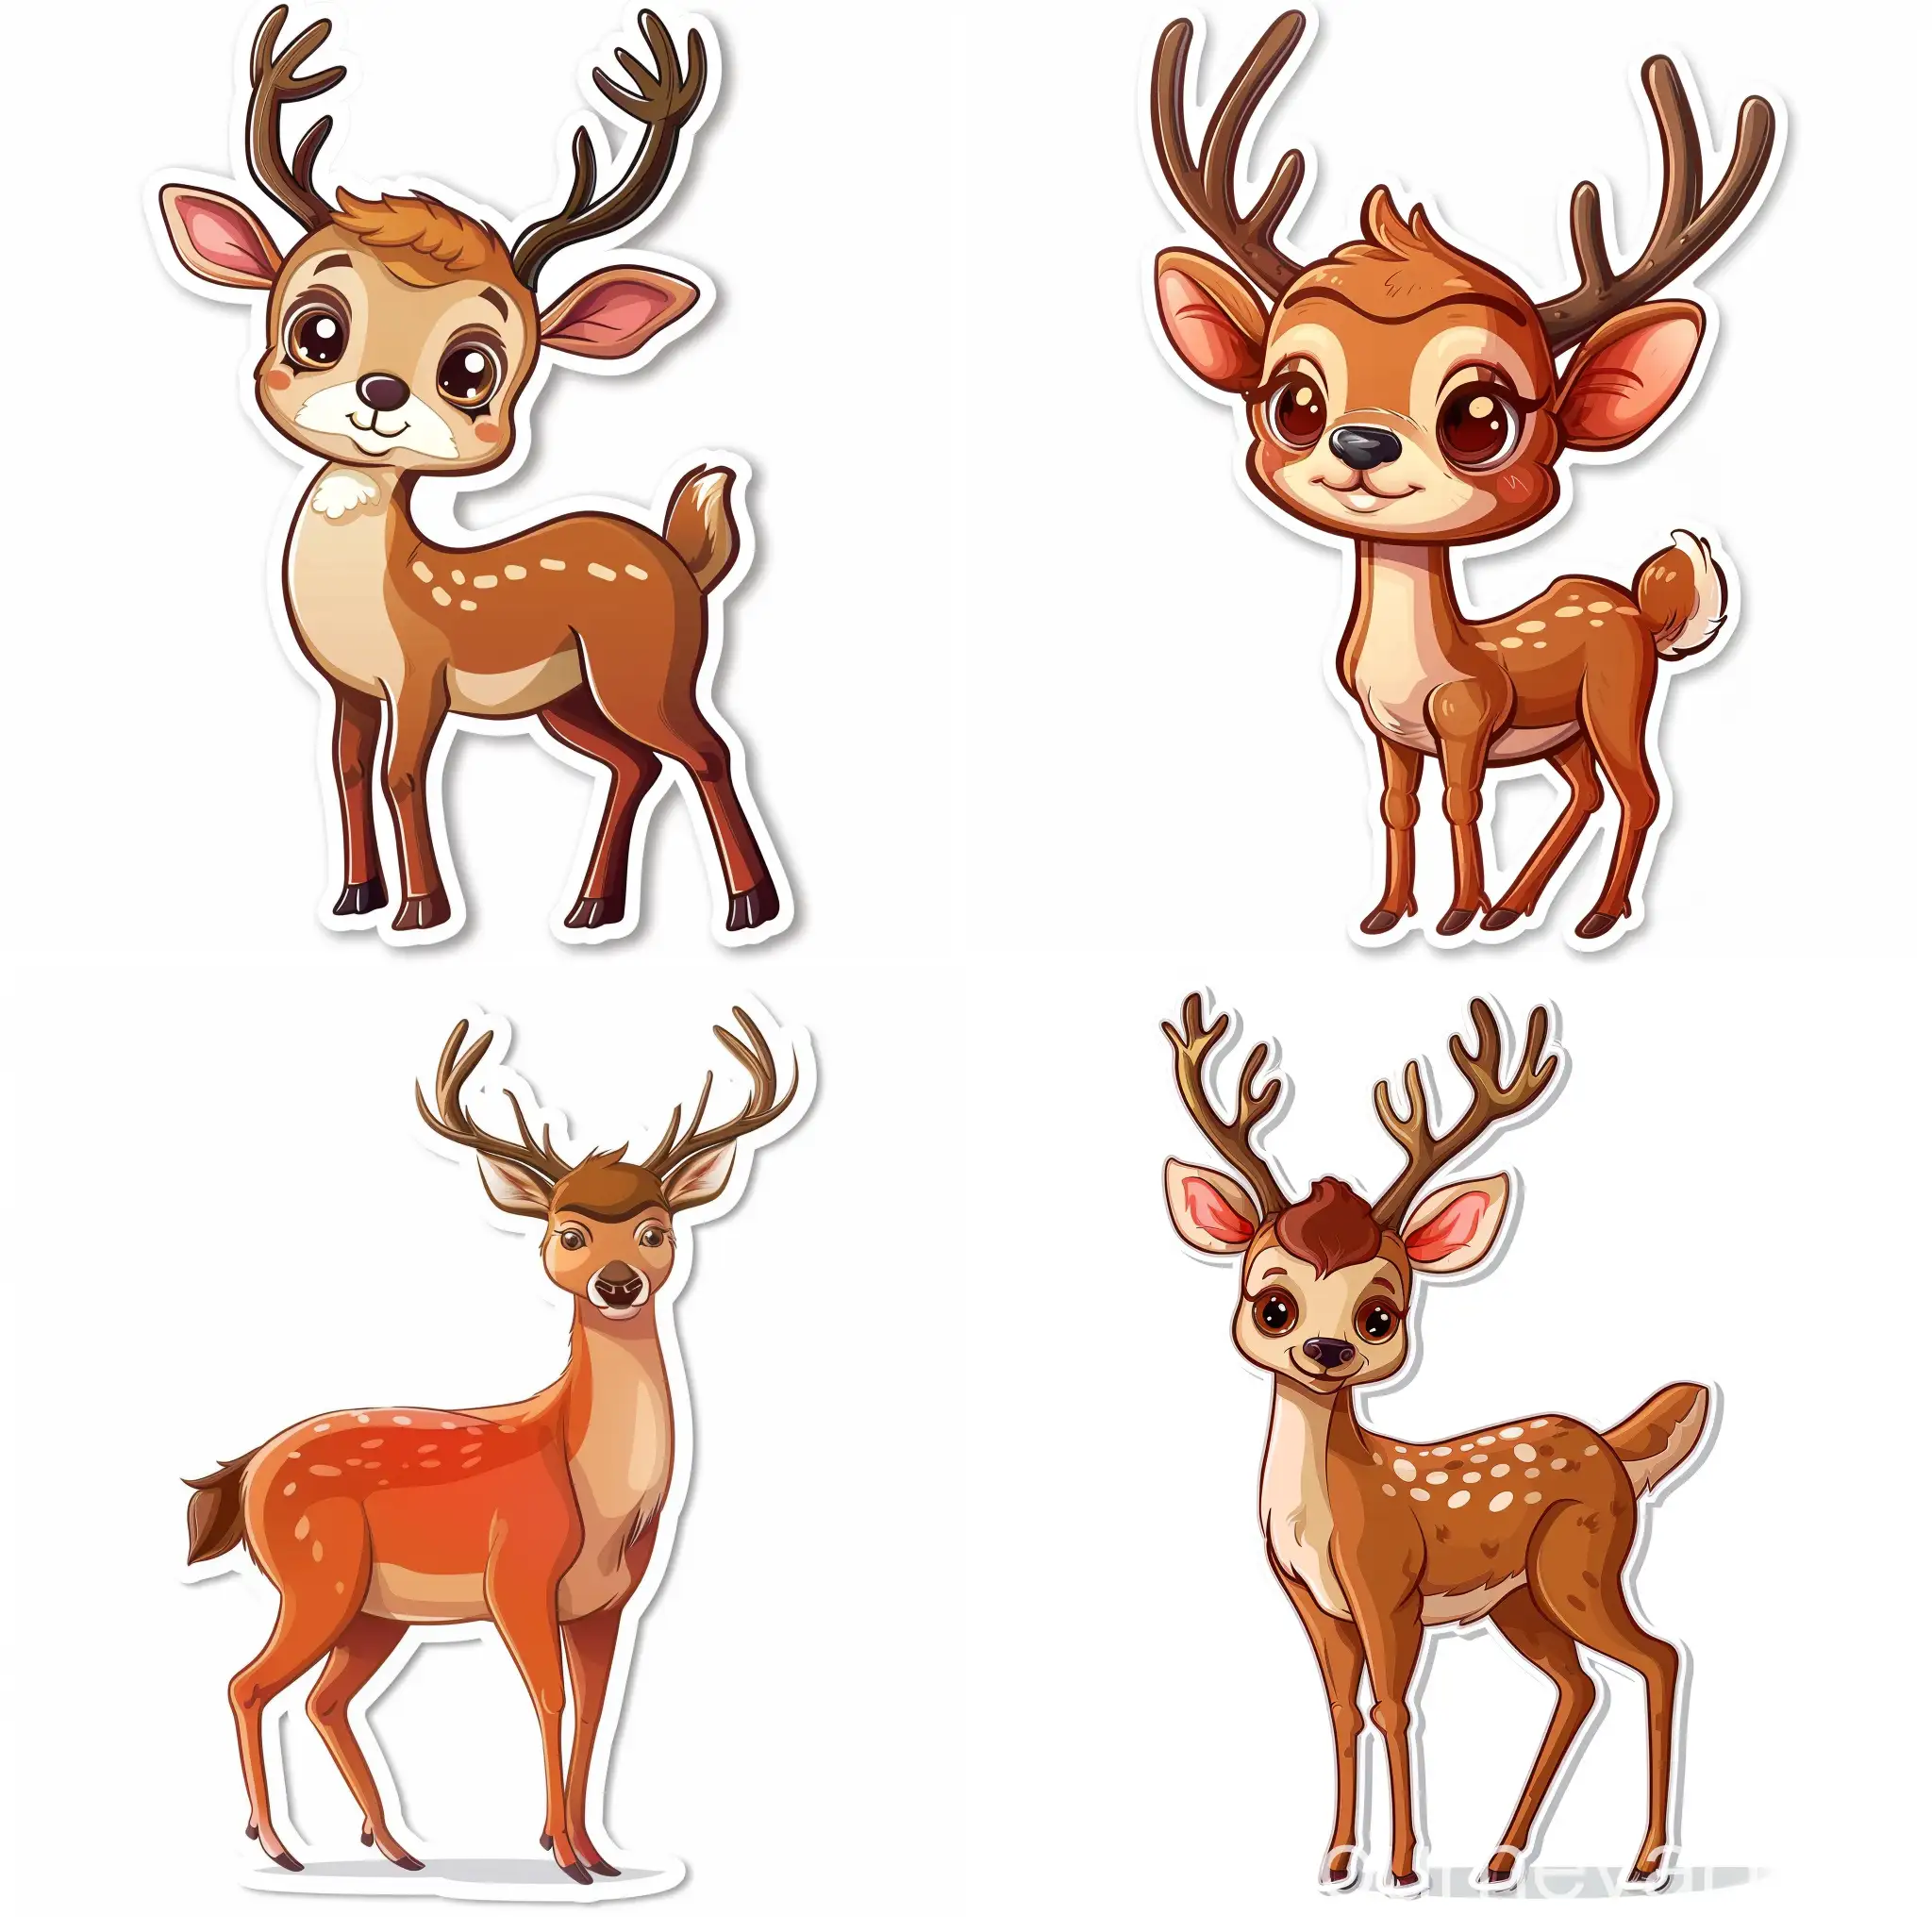 Sticker of cartoon cute the red deer, in vector style, high quality detailed